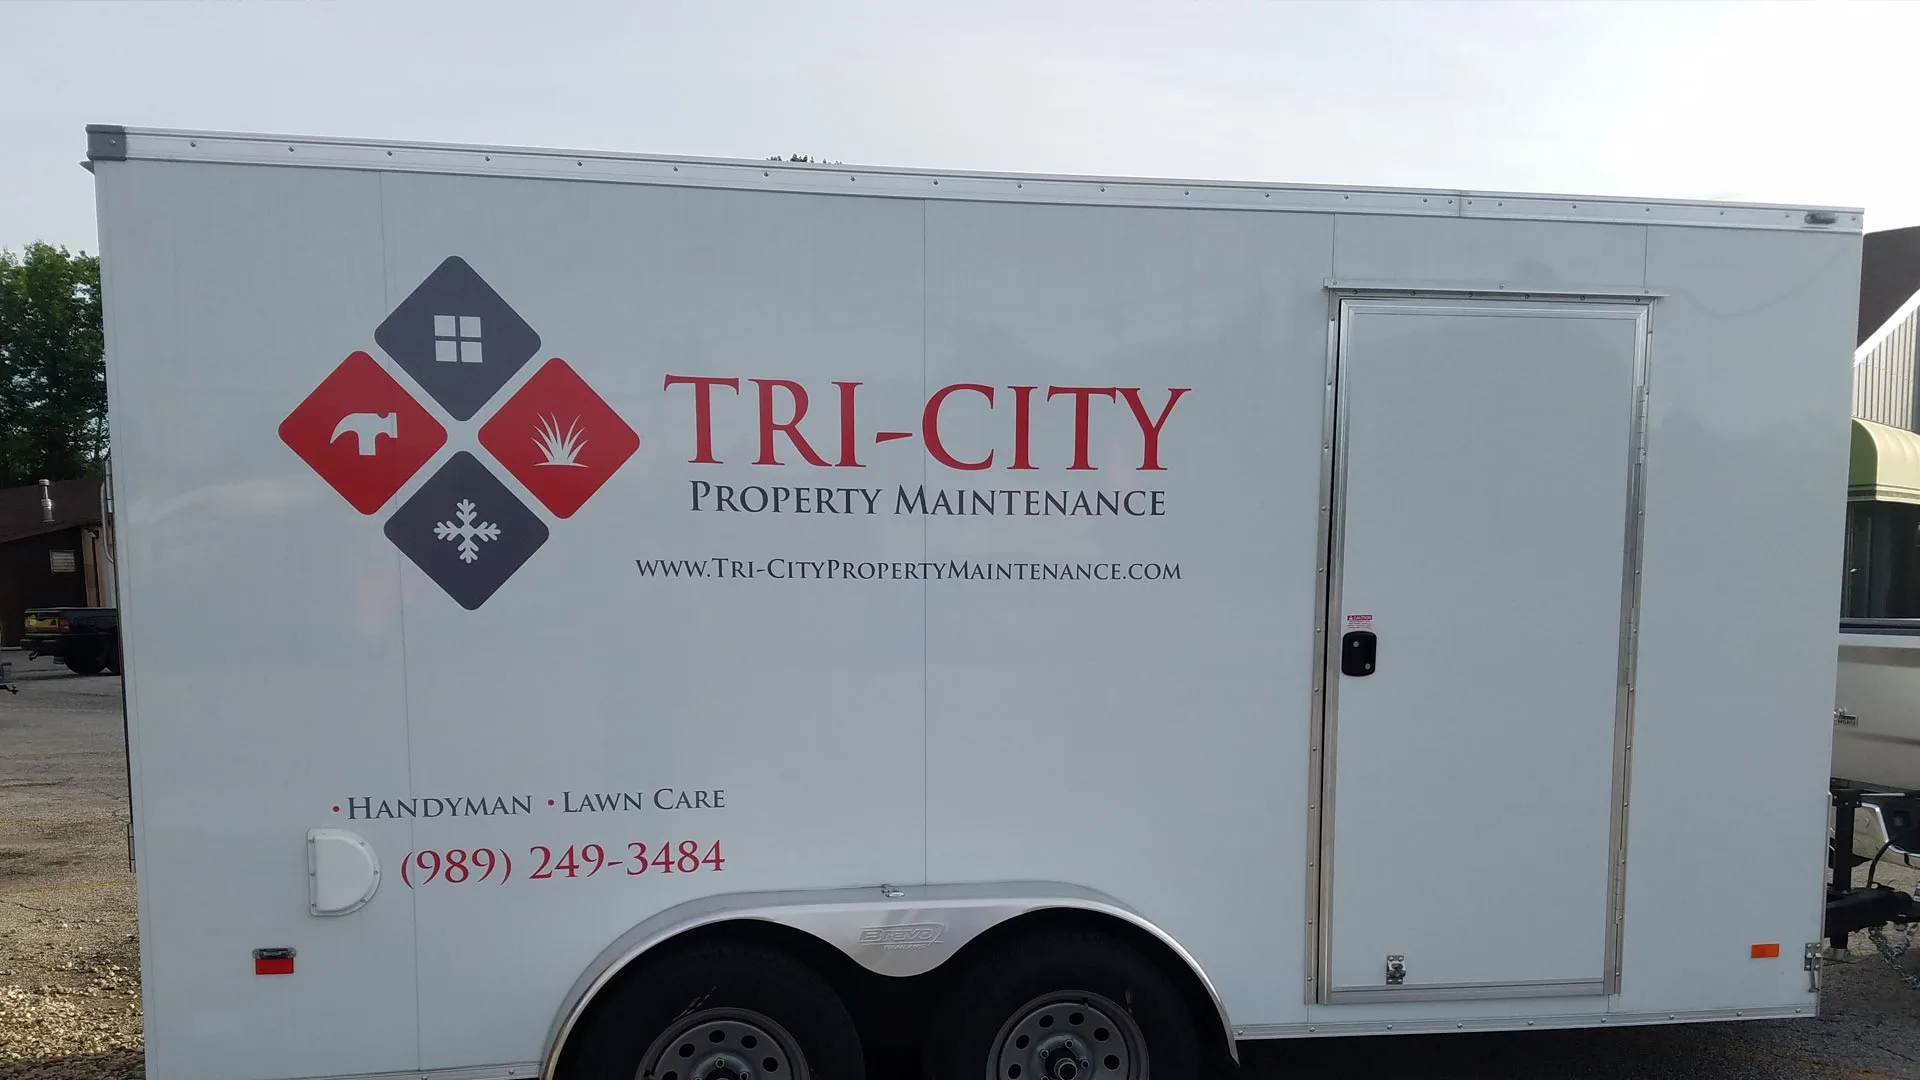 Our company trailer filled with all our equipment to maintain our client's property.